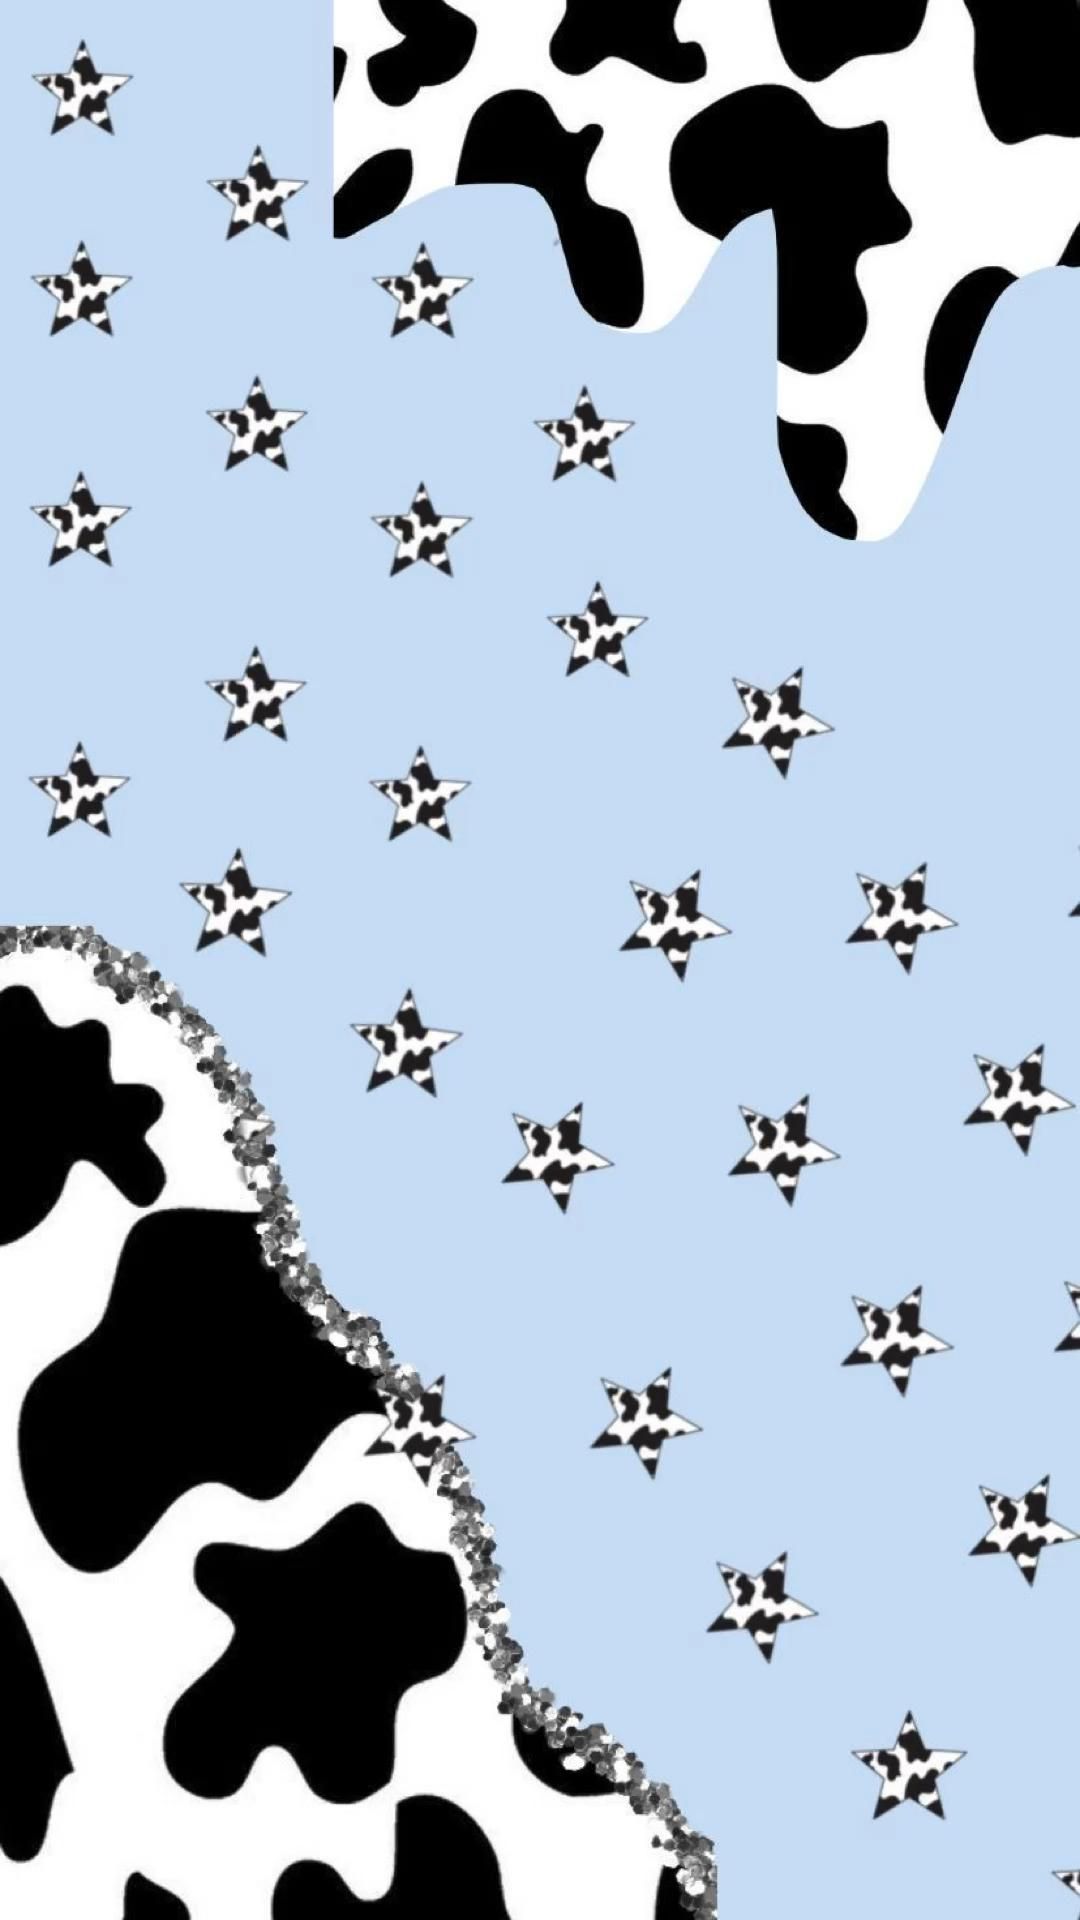 IPhone wallpaper with a cow pattern - Cow